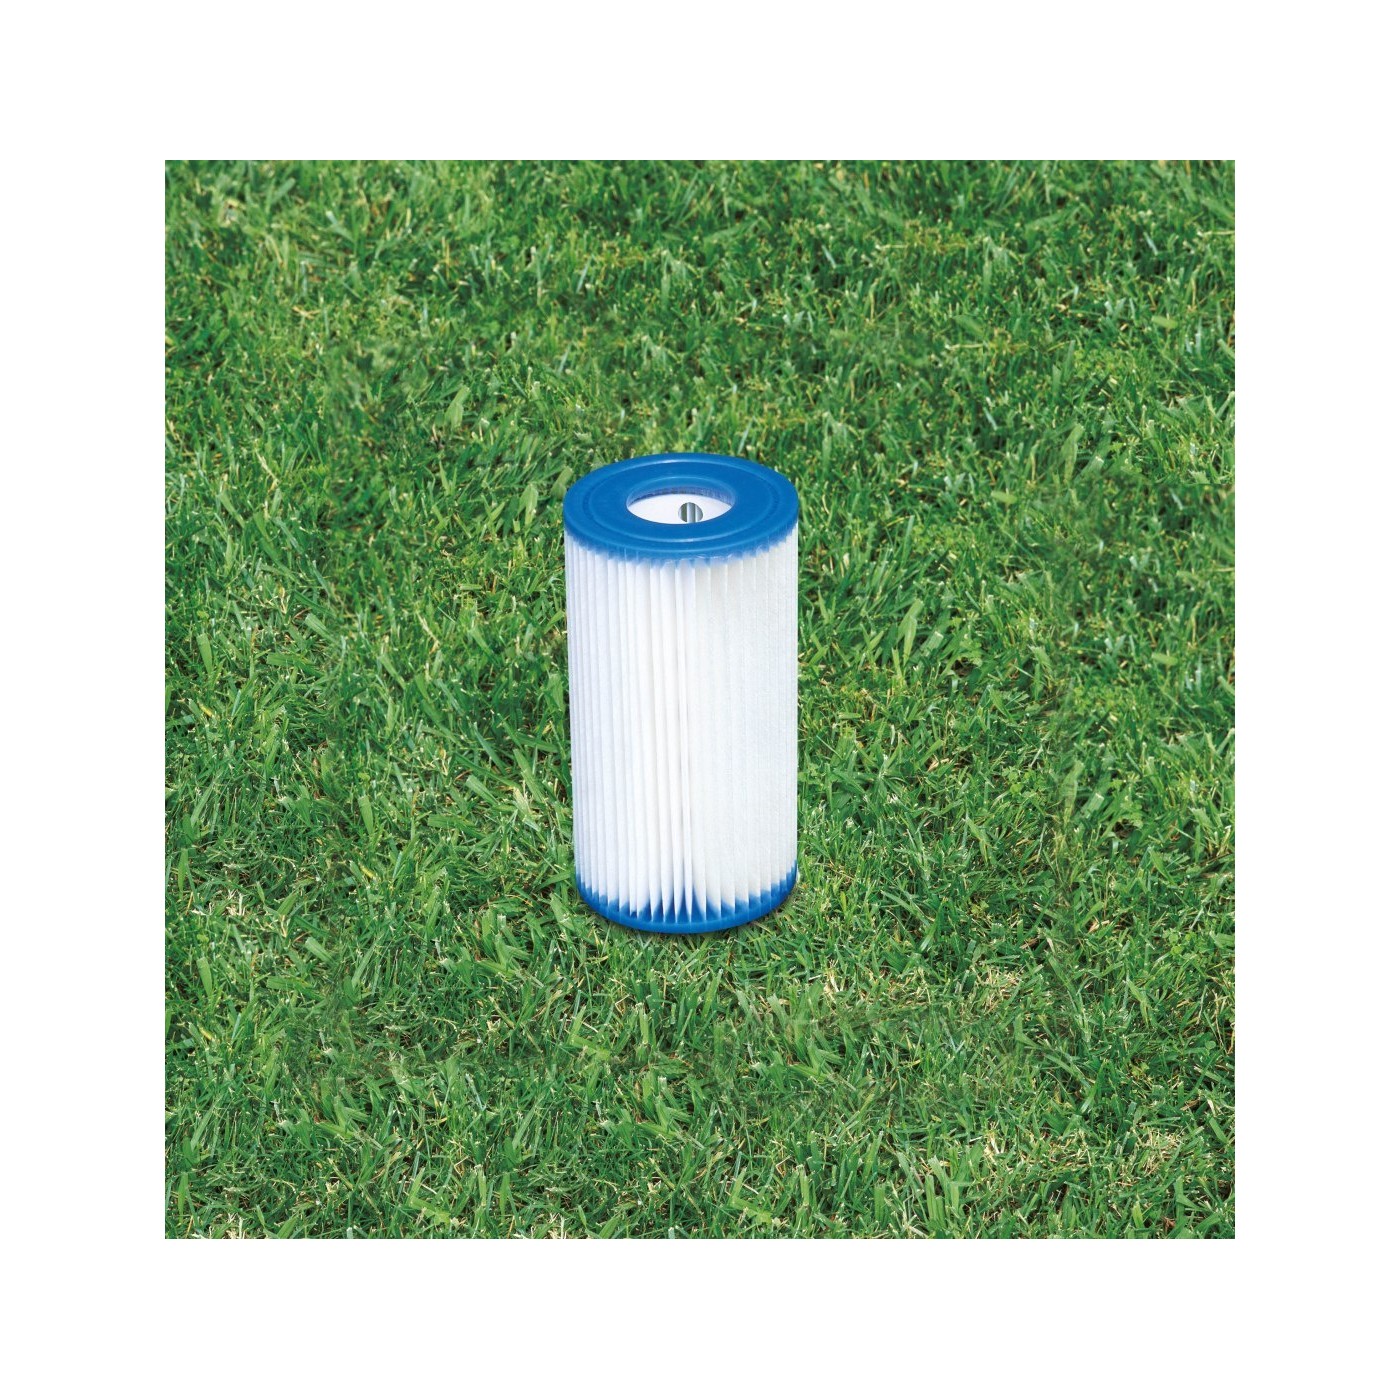 Filter for INTEX pumps, TYPE A